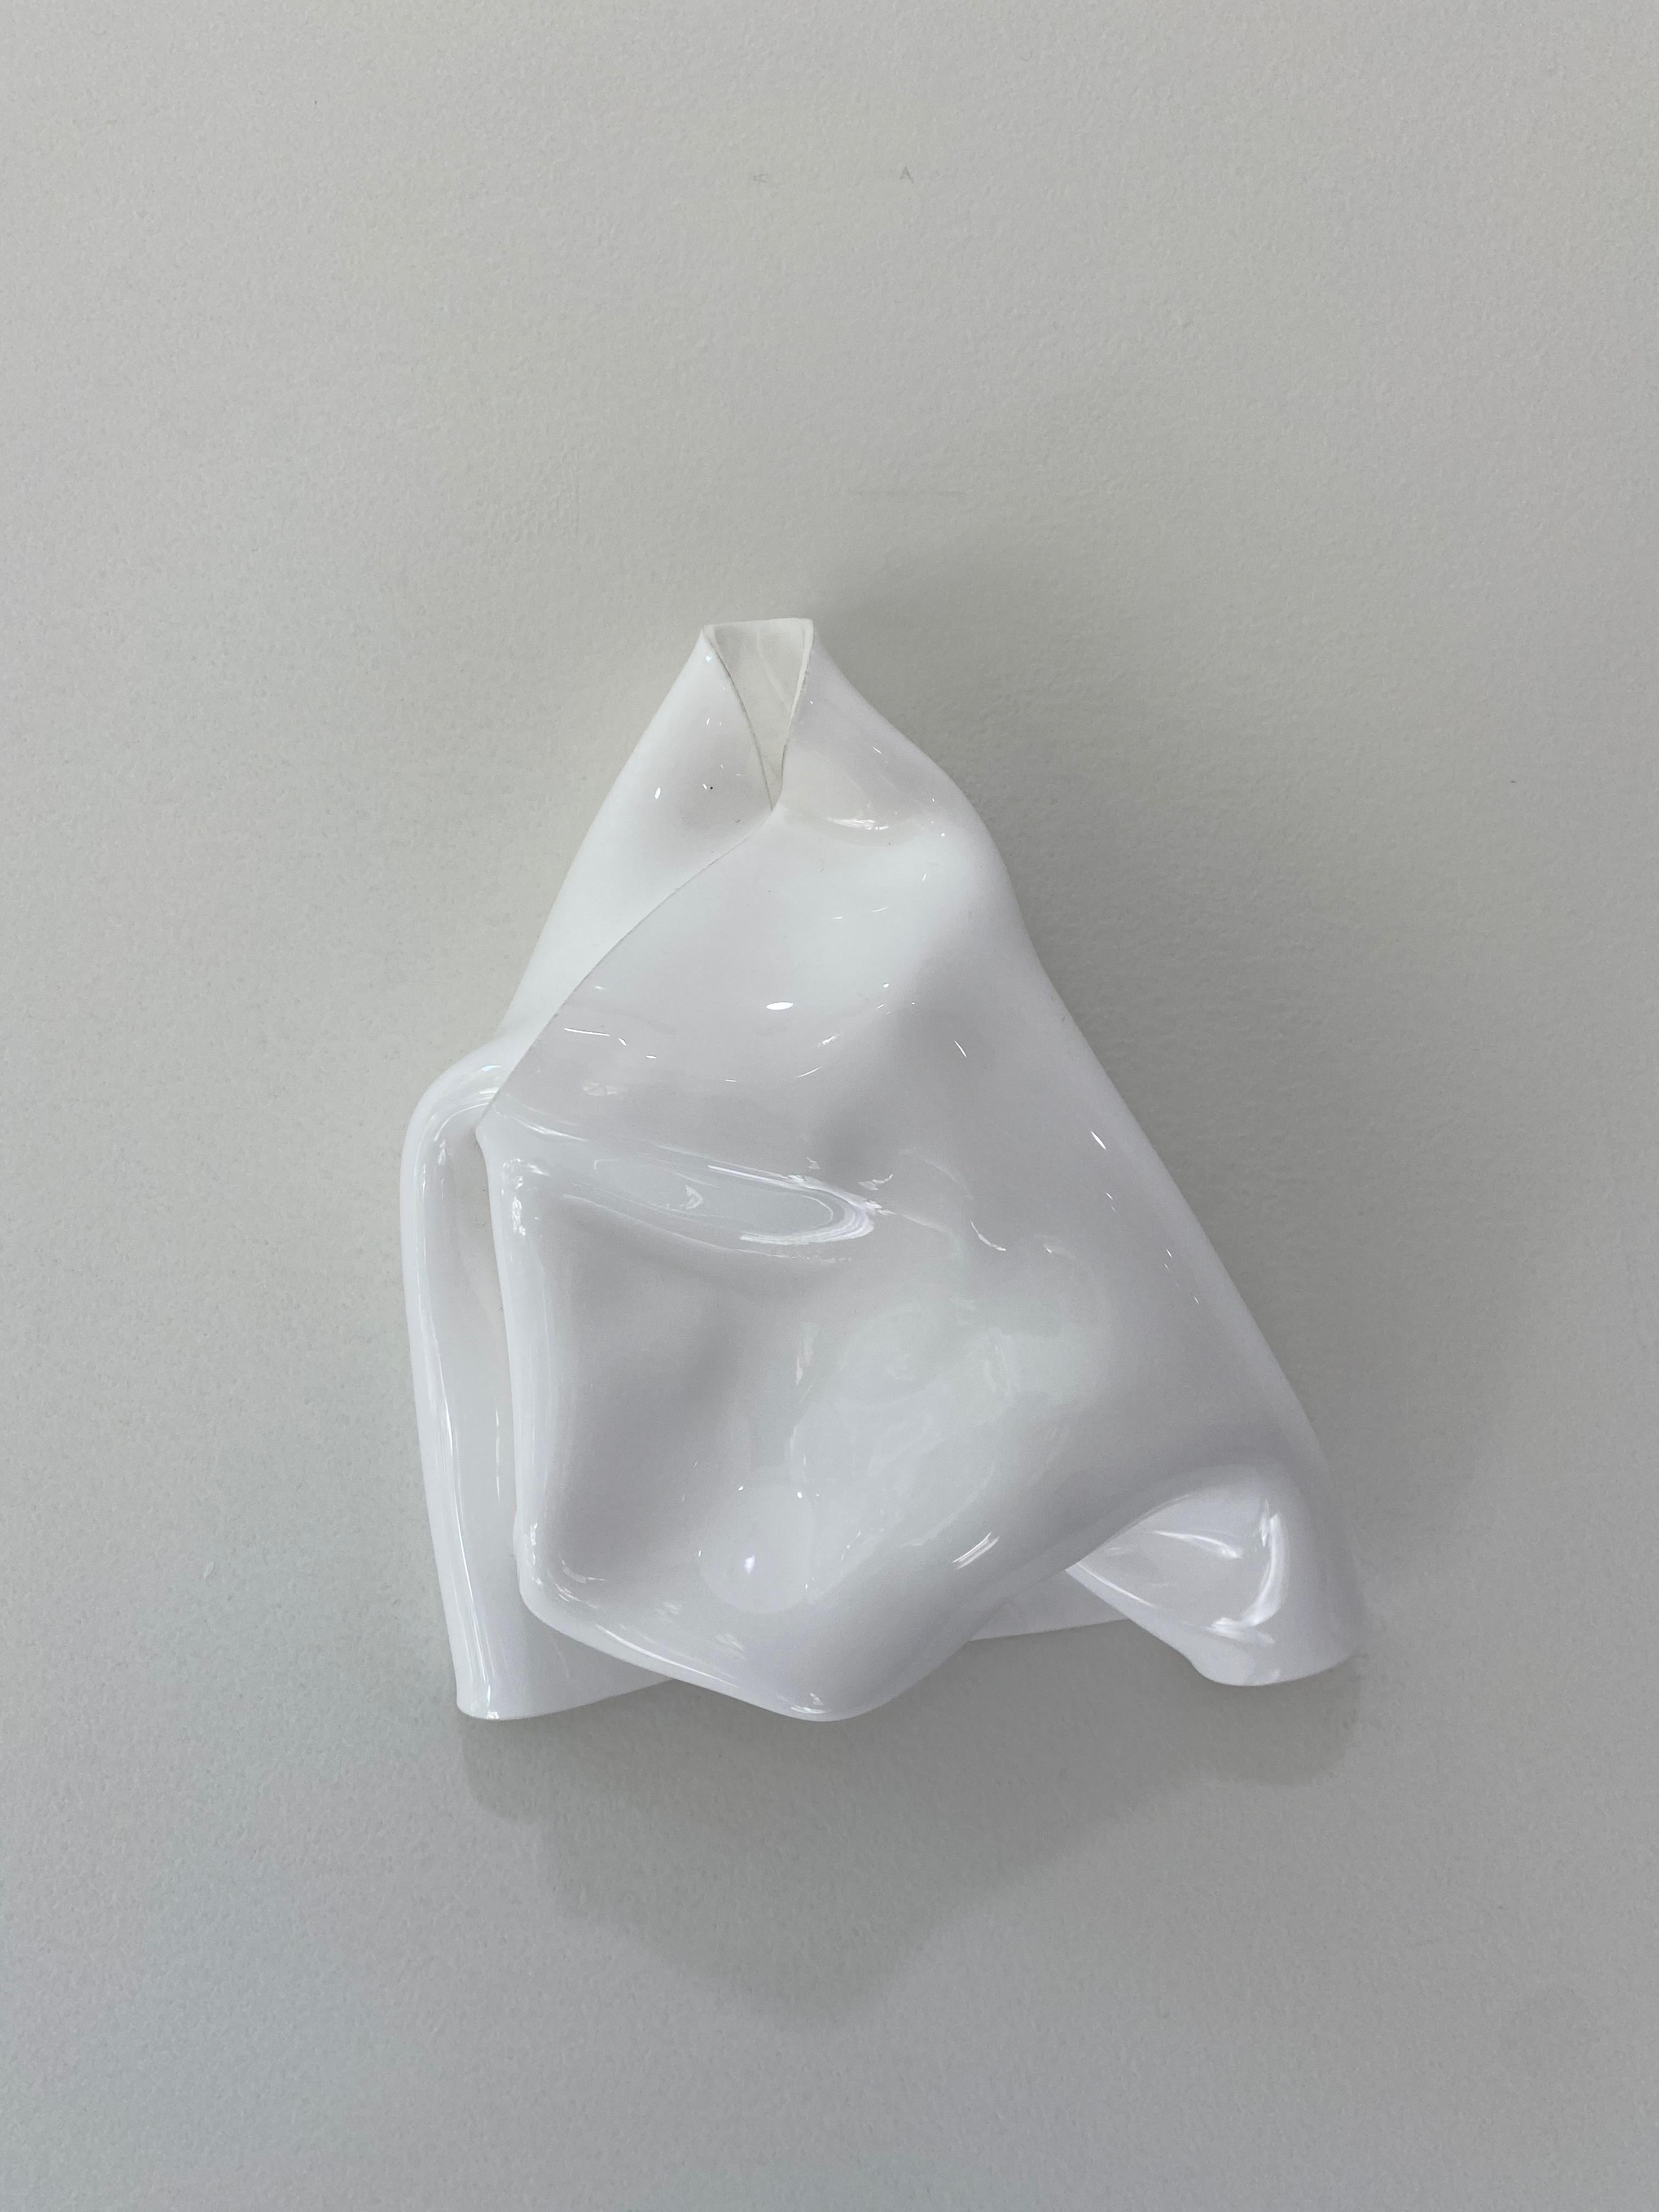 Anya Pesce Abstract Sculpture - 'Small White Three Sided Fold', Contemporary abstract sculpture